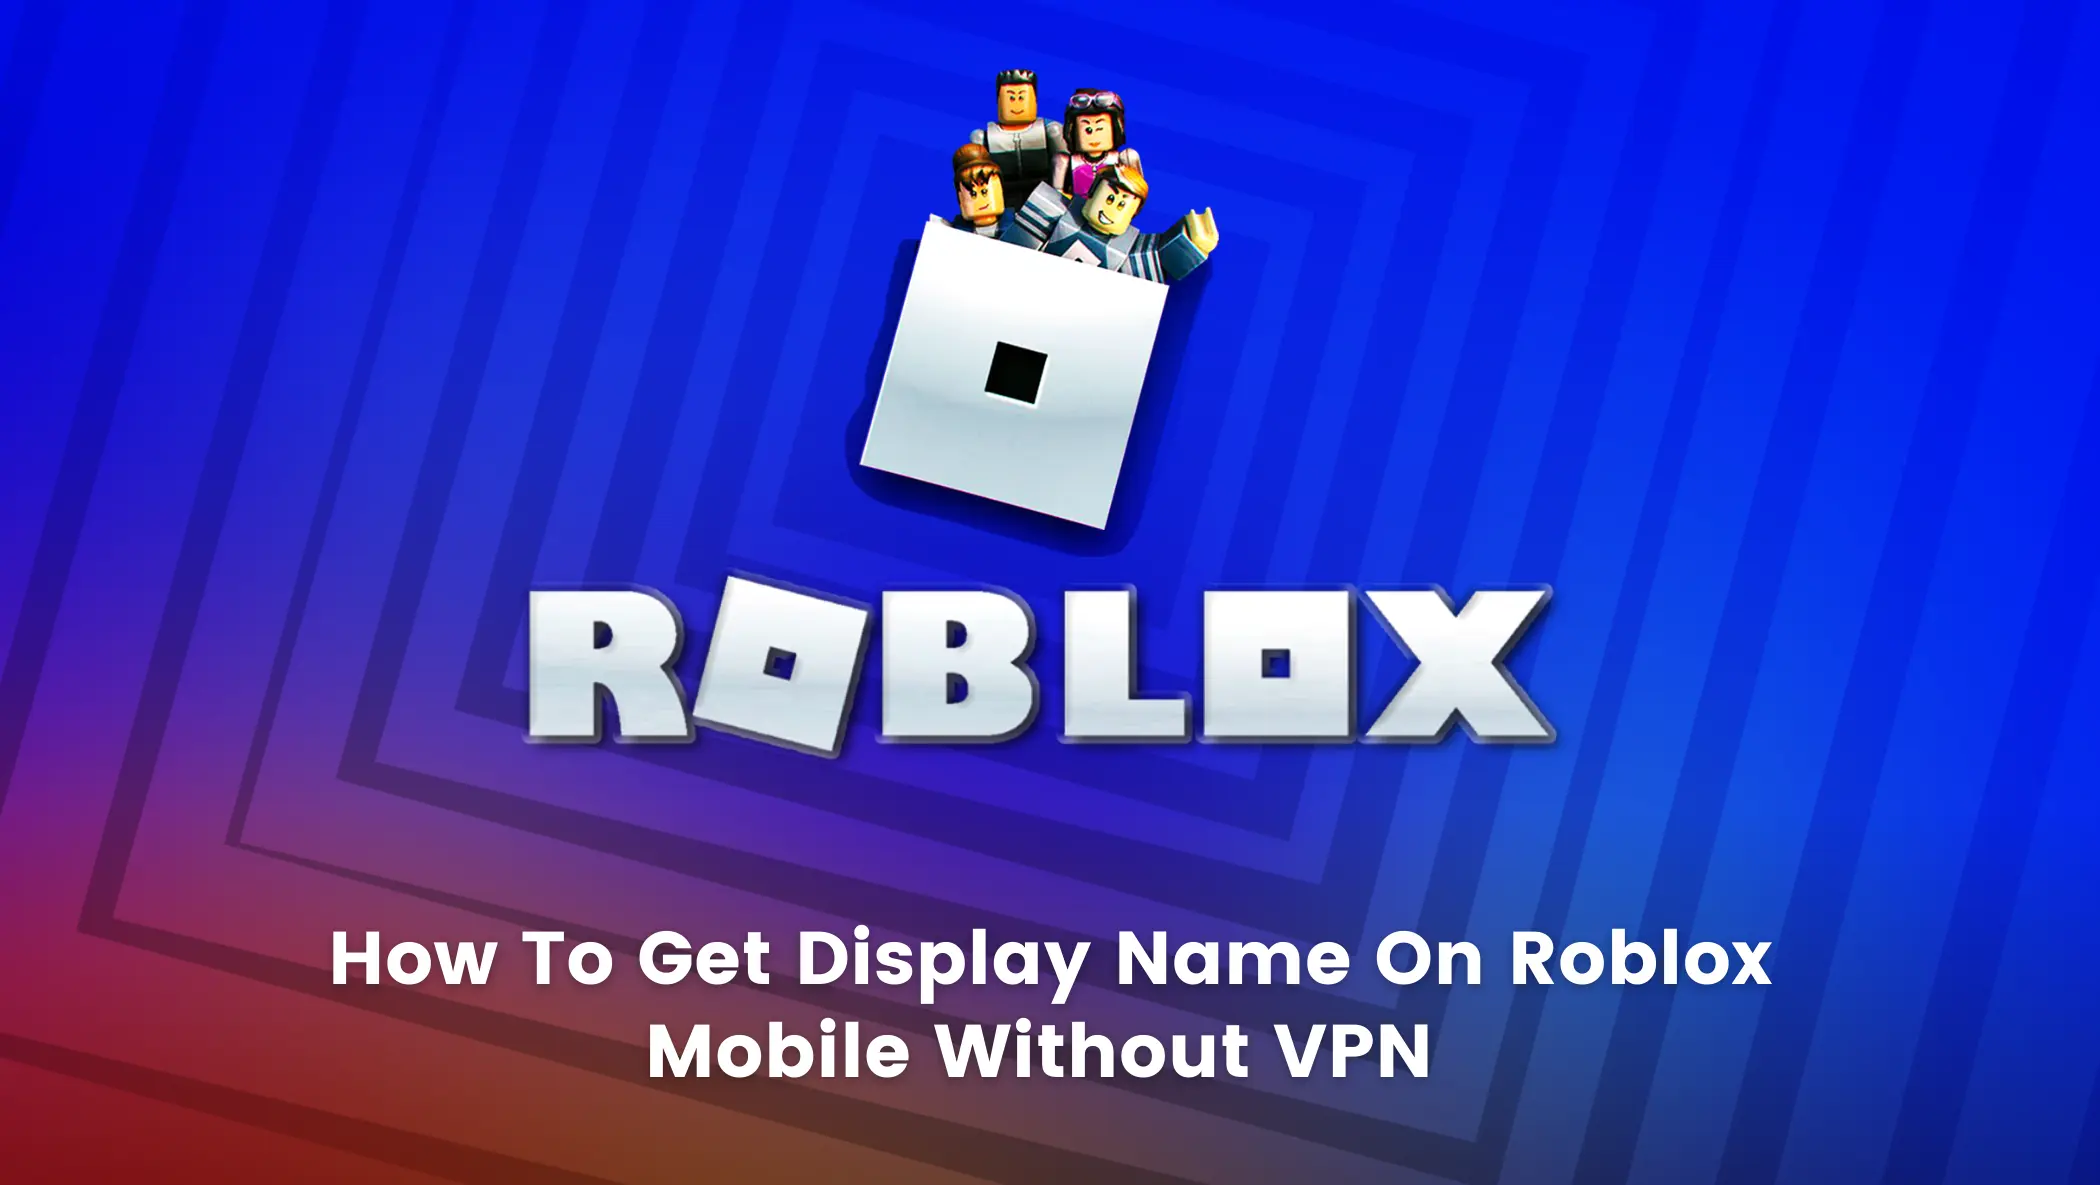 How To Get Display Name On Roblox Mobile